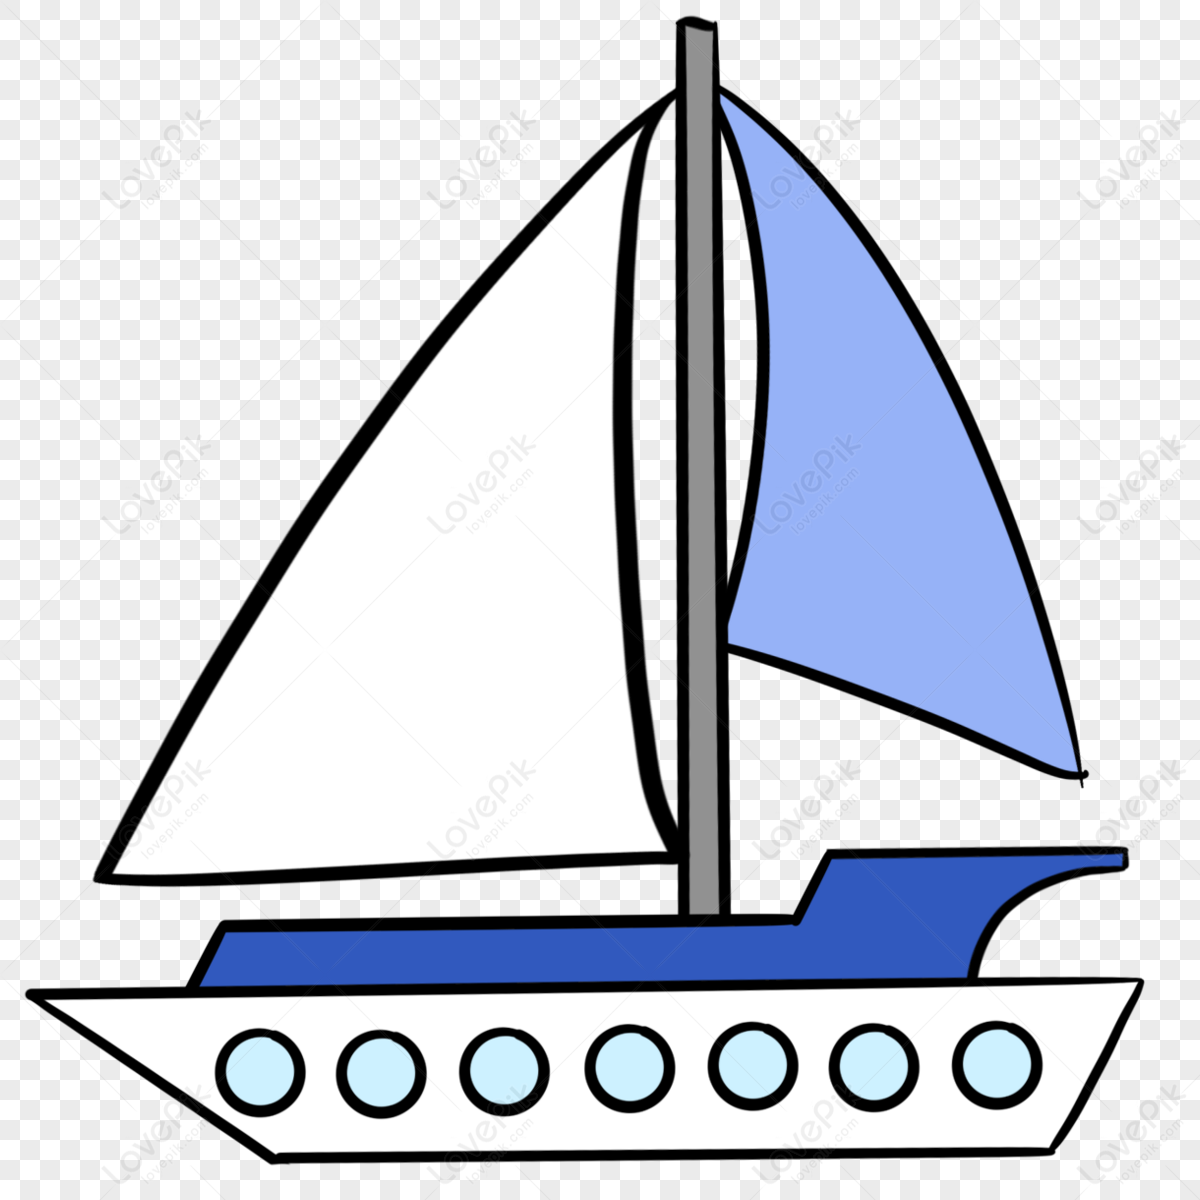 Blue clip art boat cruise ship lineart,cruises,line draft free png